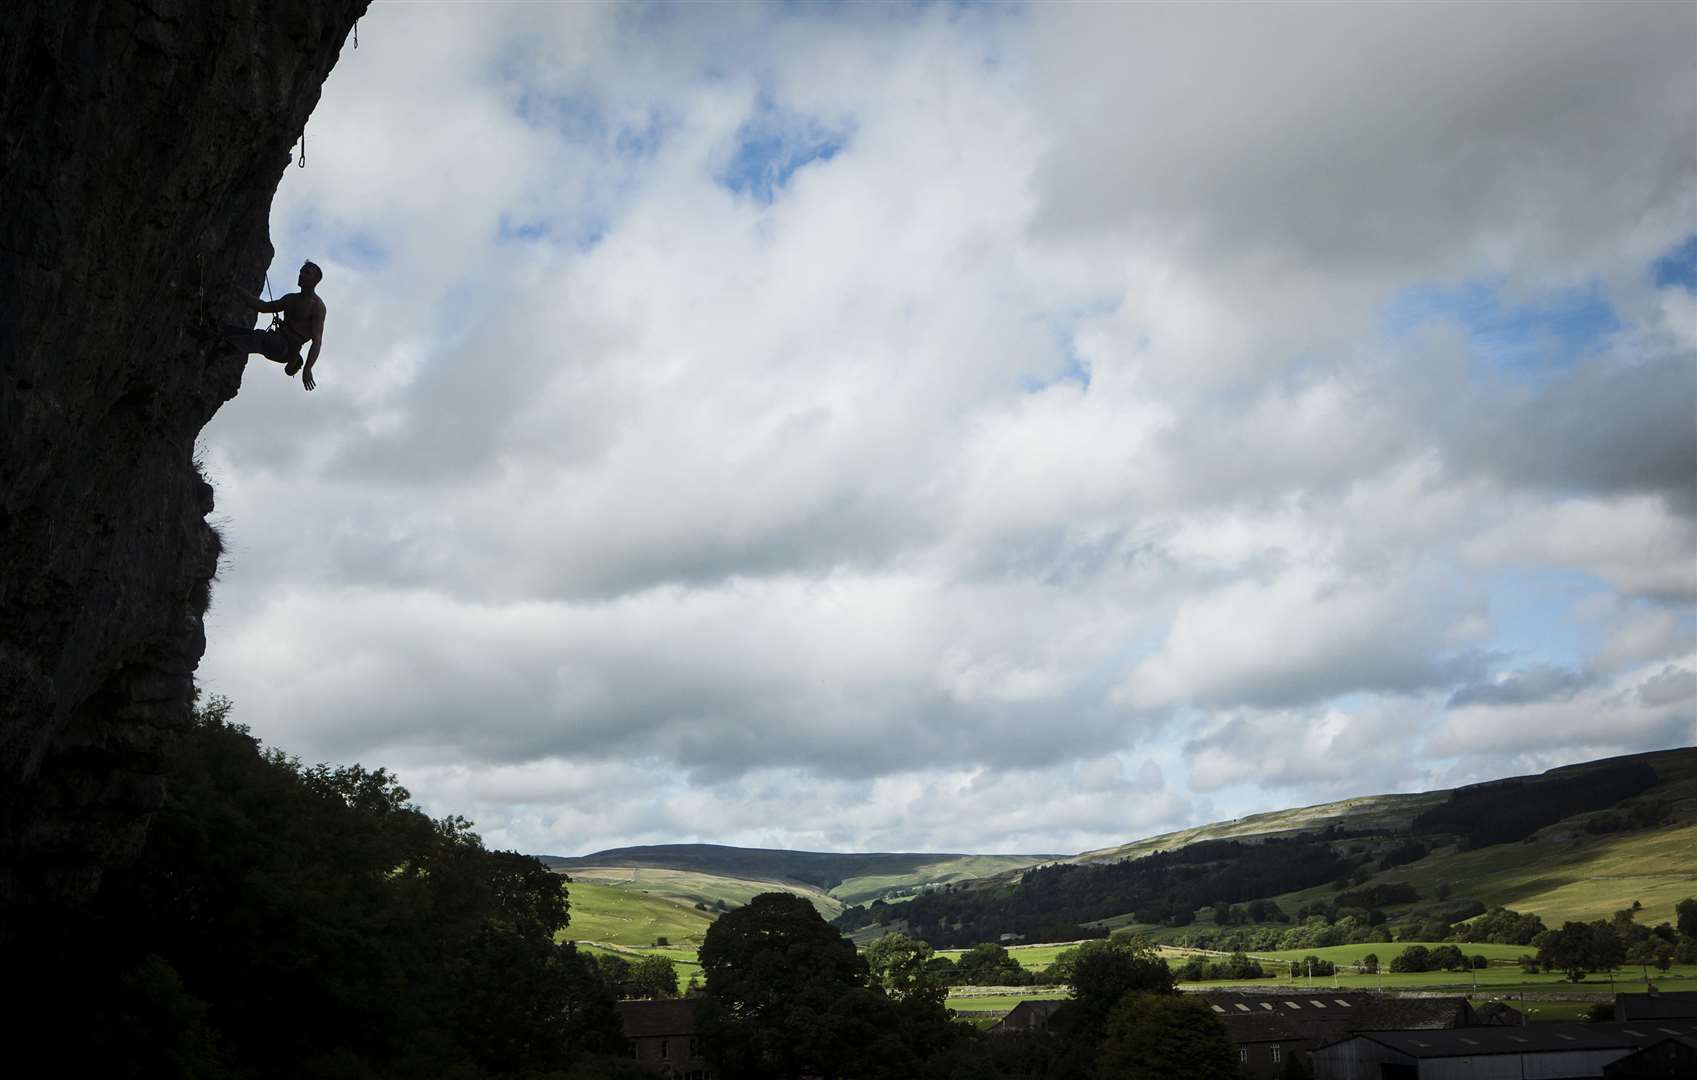 Kilnsey Crag is one of the best-known landmarks in the Yorkshire Dales and one of the national park’s Big Three limestone rock faces (Danny Lawson/PA)